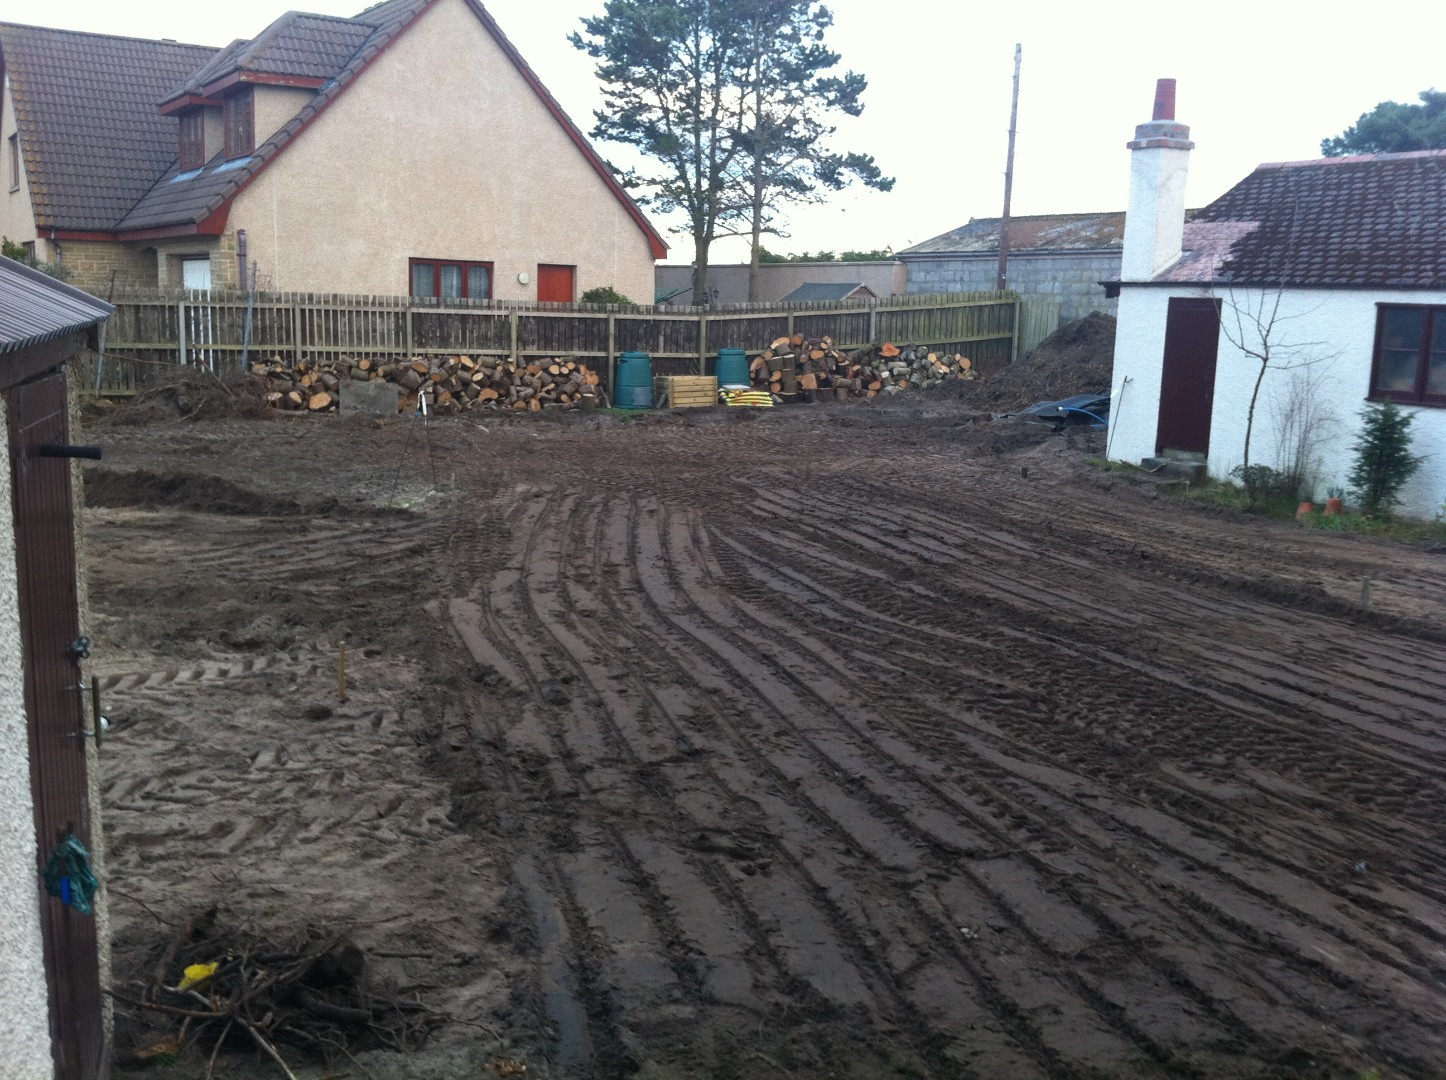 Levelled lawn